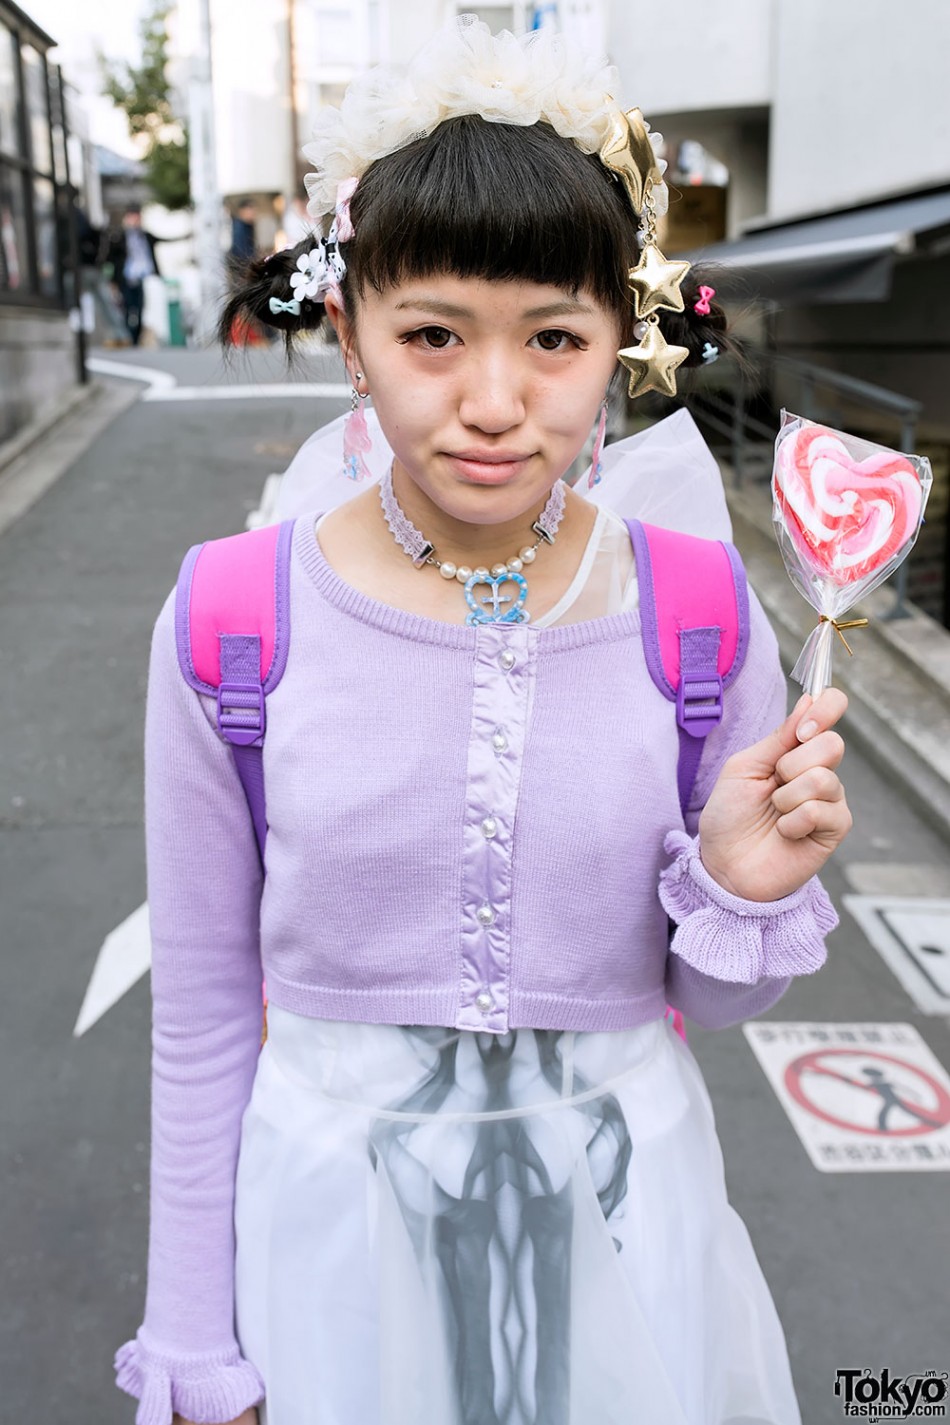 Harajuku Girls W Sheer Skirts Loafers Cute Accessories And Lollipops Tokyo Fashion 